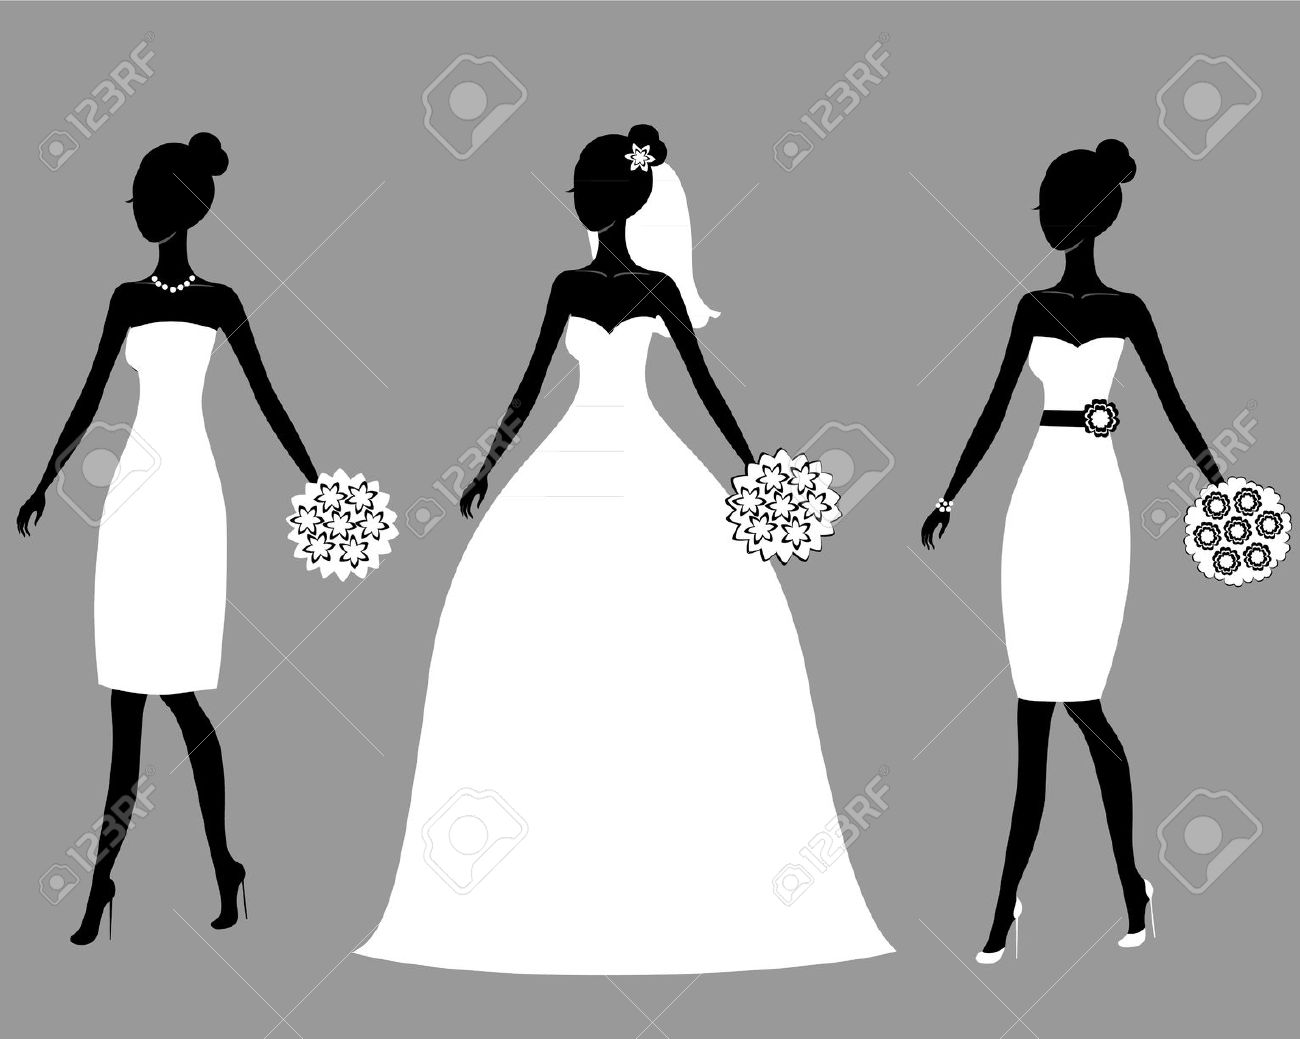 People Silhouette Clipart bridesmaid